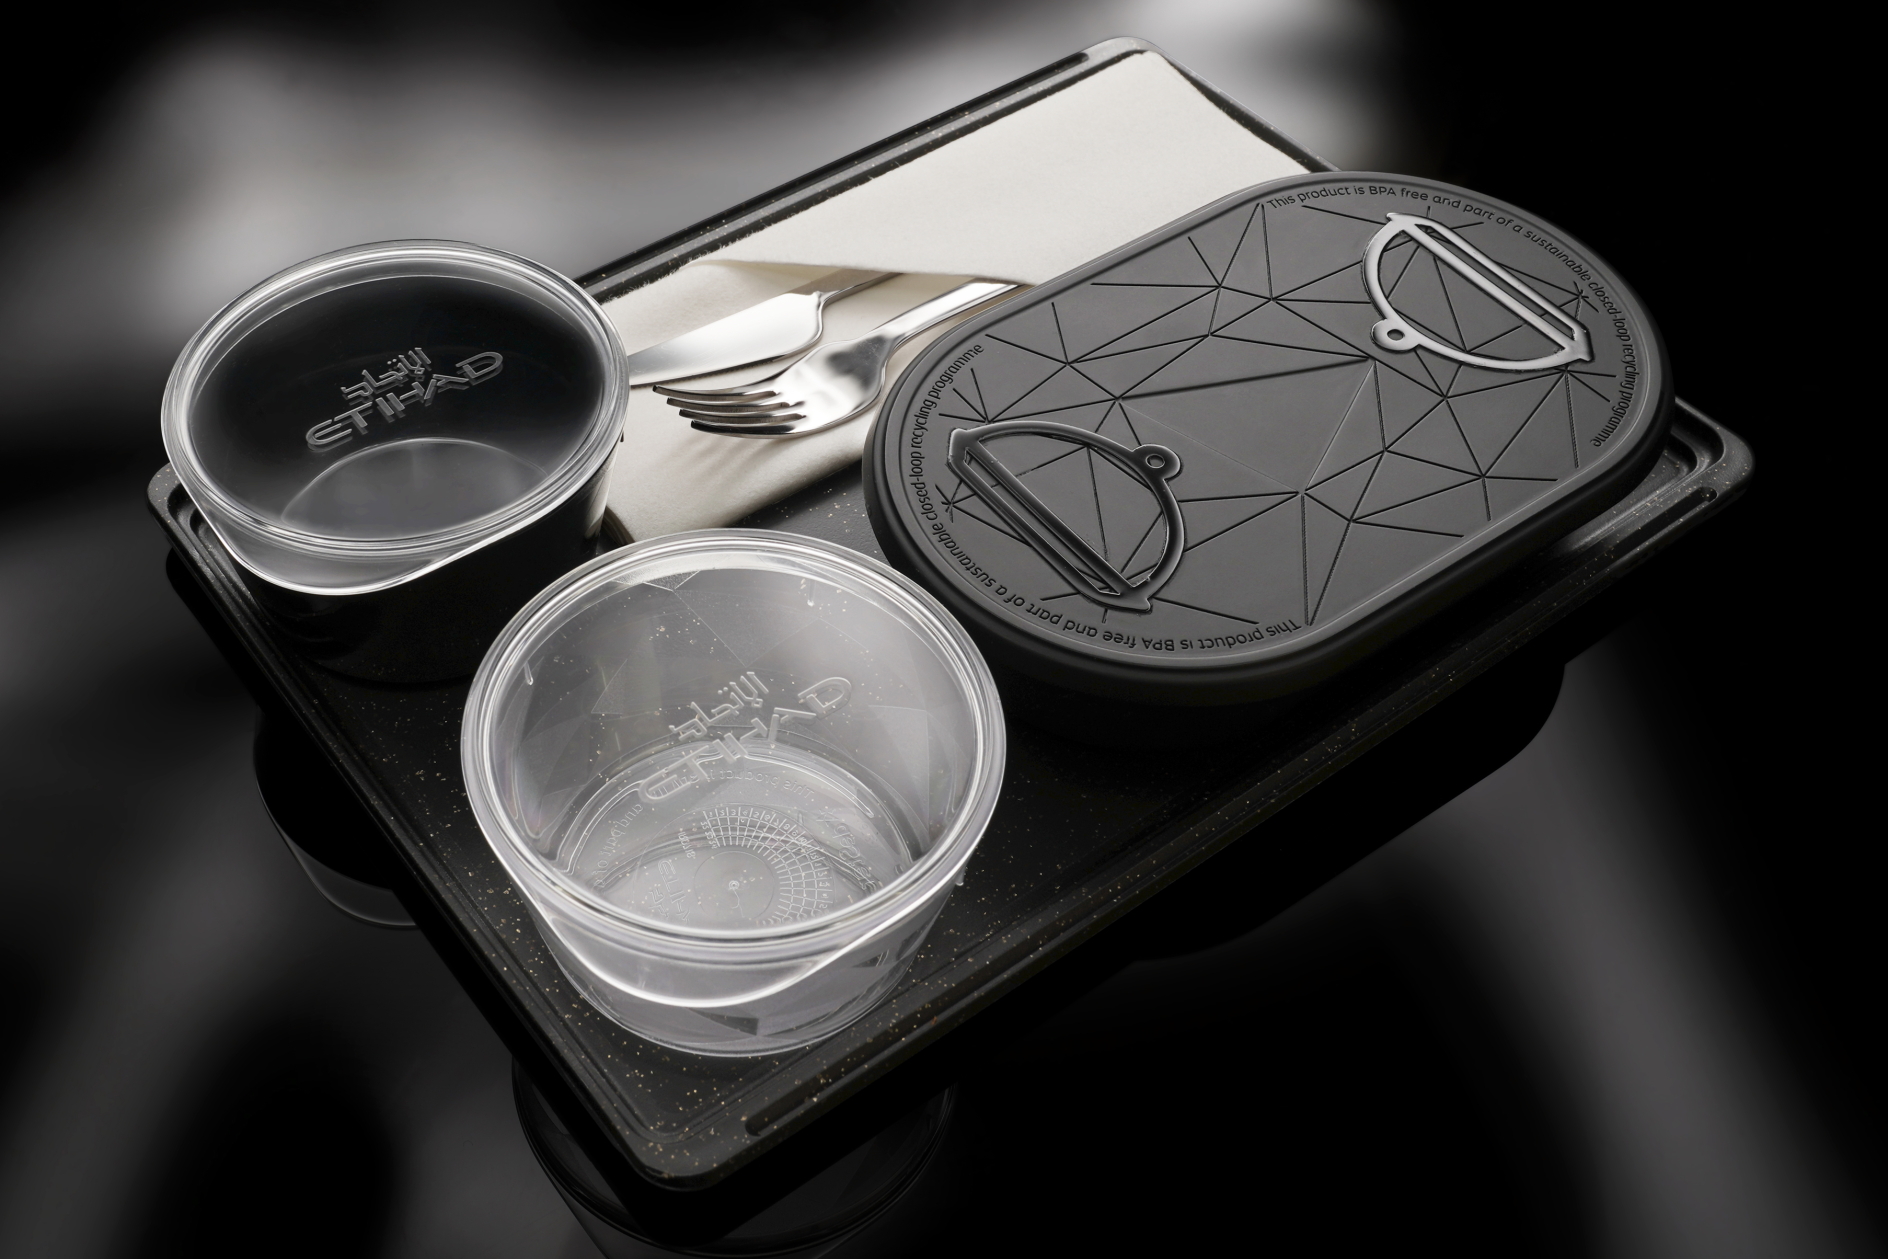 Etihad's new Economy Class tableware will take off in Q4 2022. Click to enlarge.